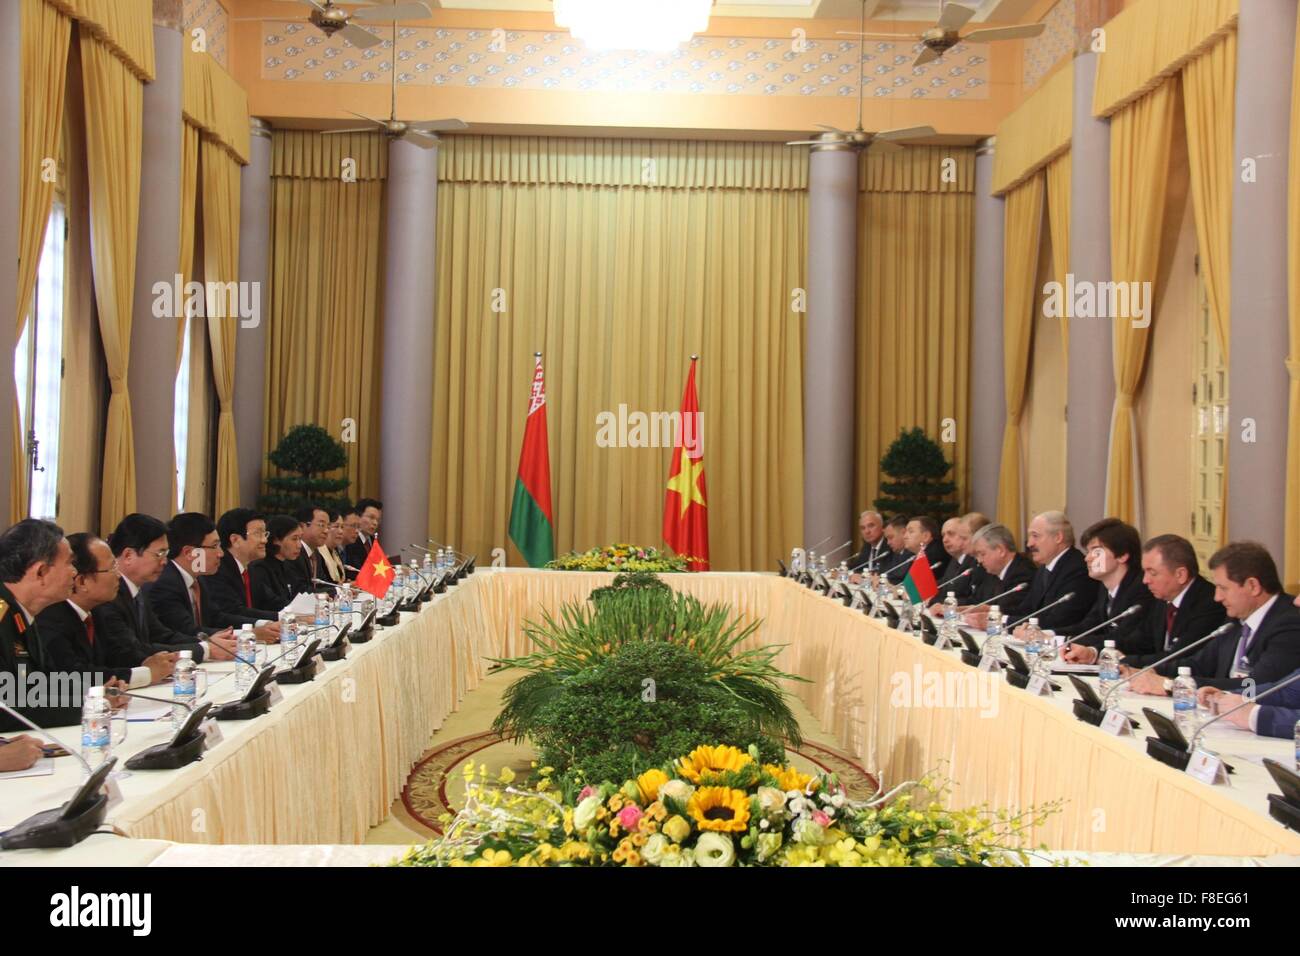 (151209) -- HANOI, Dec. 9, 2015 (Xinhua) -- Vietnamese President Truong Tan Sang (5th L) holds a talk with Belarusian President Alexander Lukashenko (4th R) in Hanoi, capital of Vietnam, Dec. 9, 2015. Lukashenko is paying a two-day official visit to Vietnam from Tuesday. (Xinhua/Le Yanna) Stock Photo